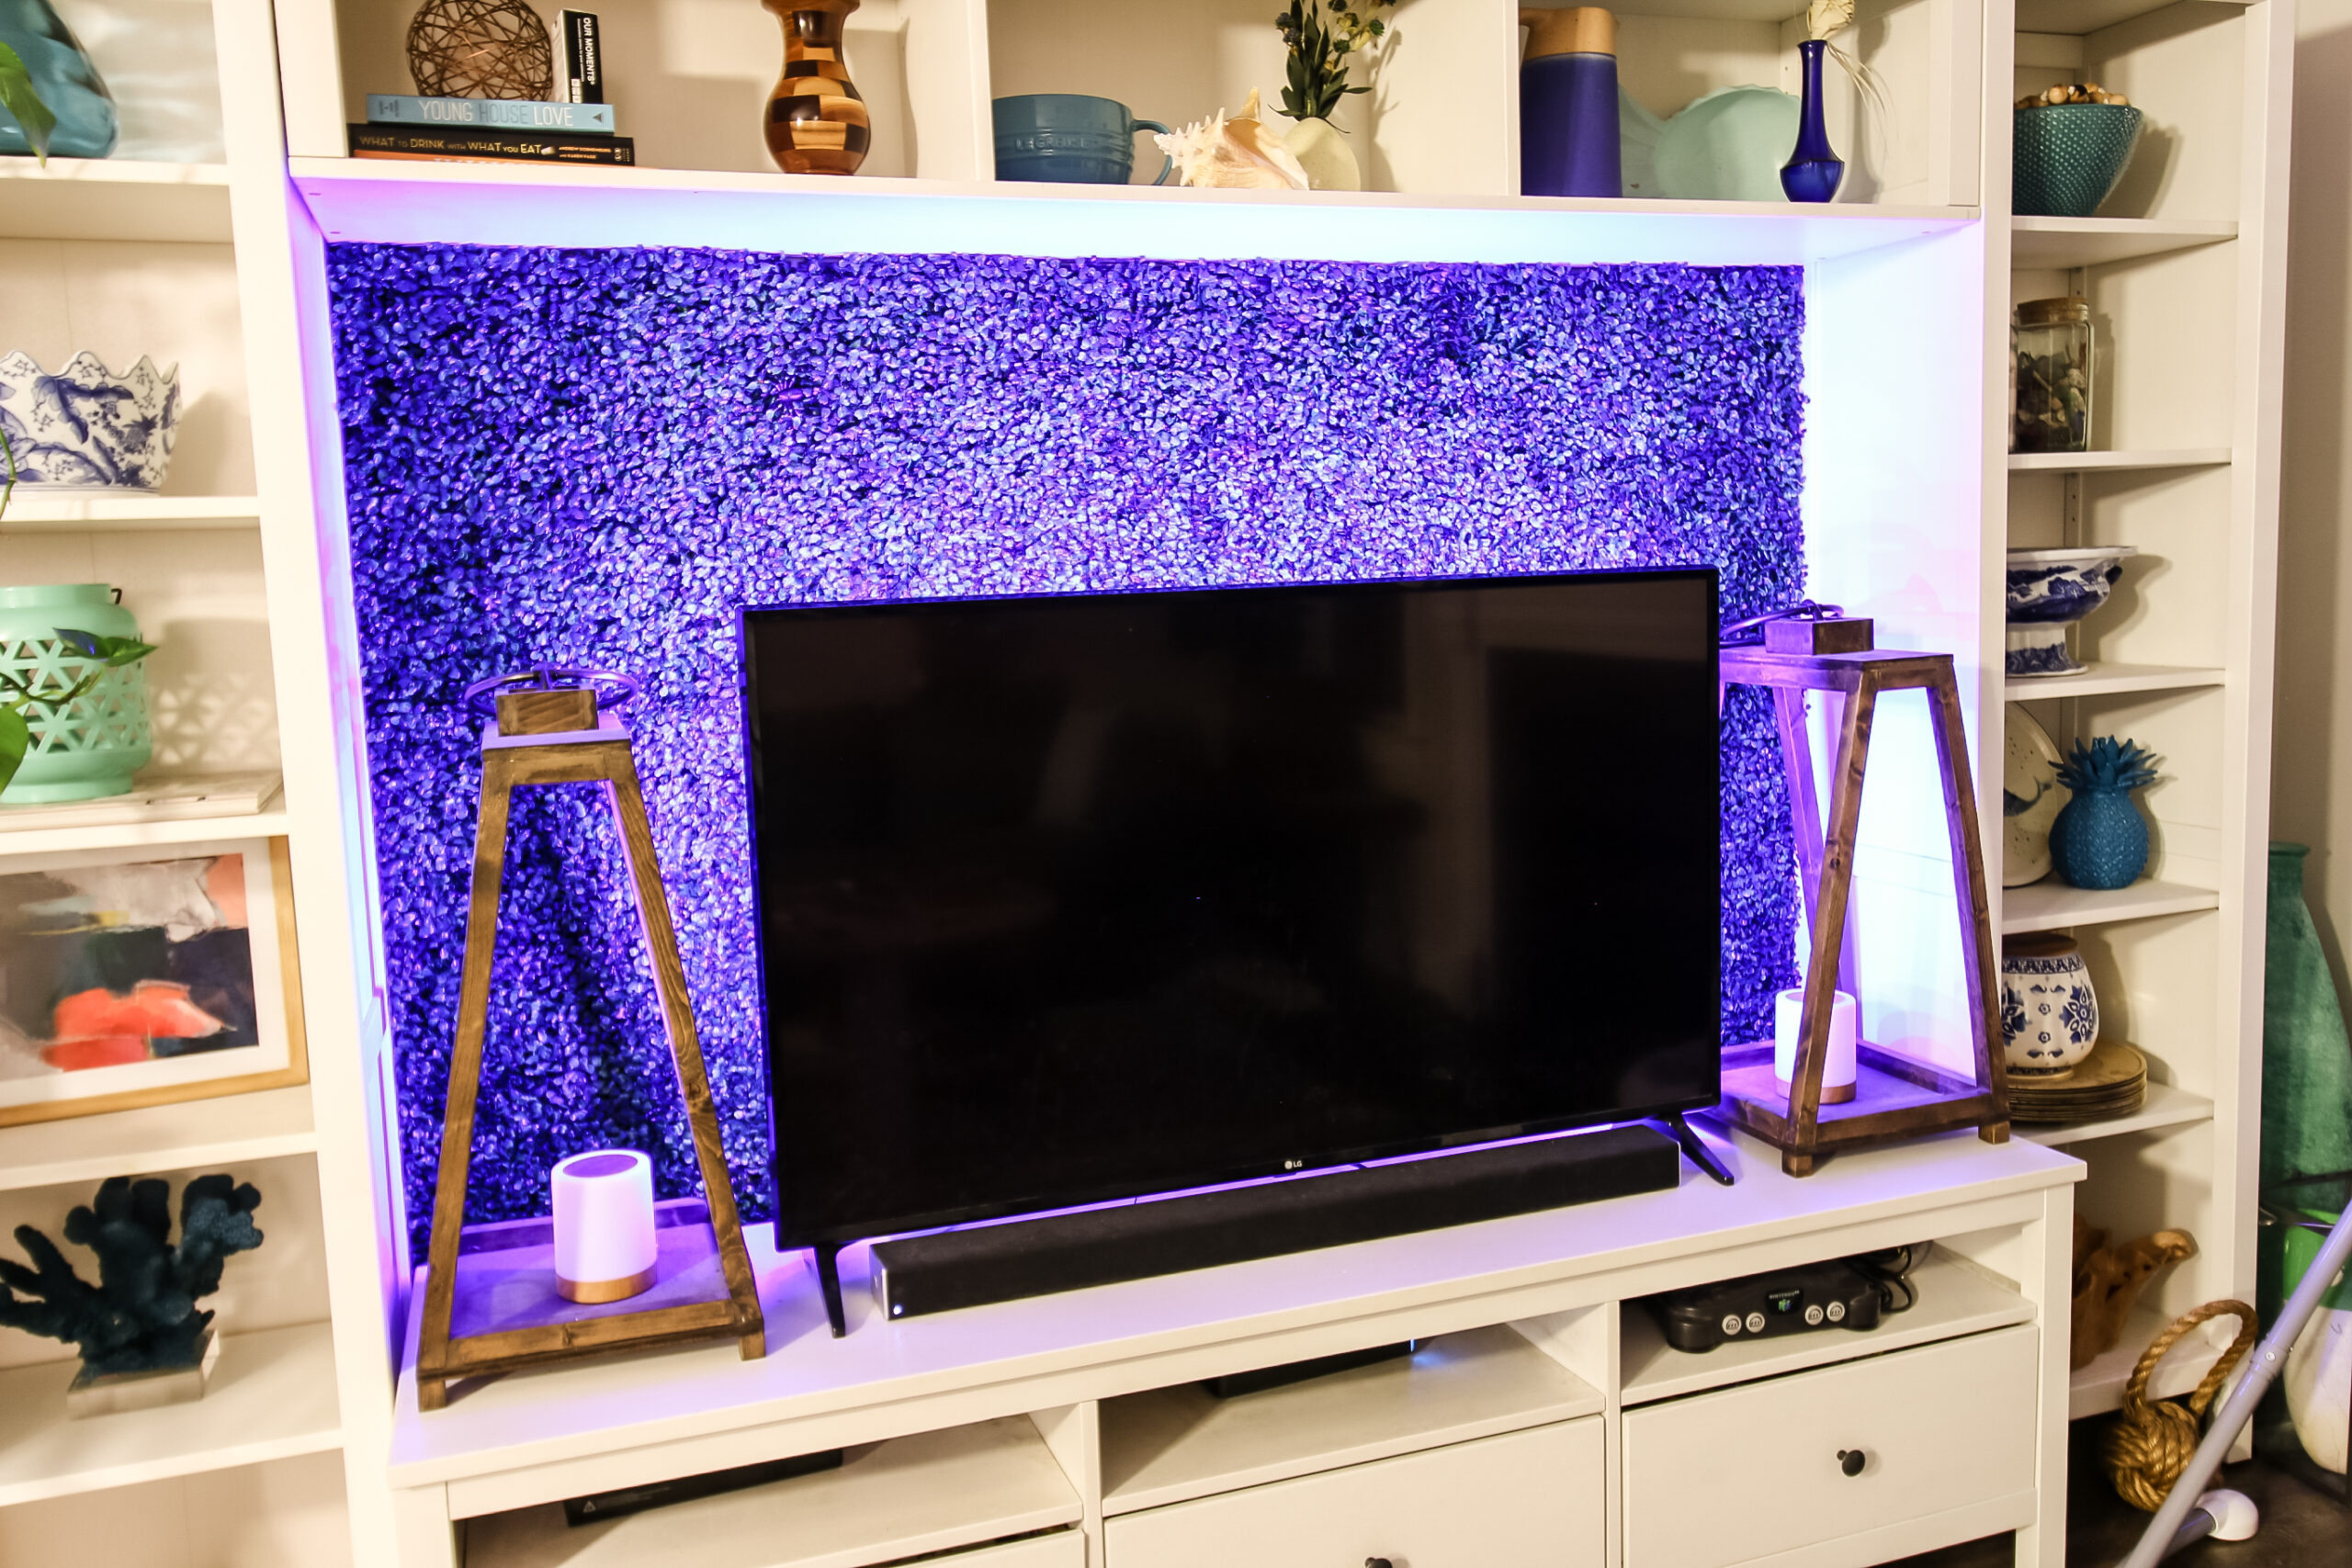 Step-by-Step Guide: Installing LED Lights Behind Your TV for